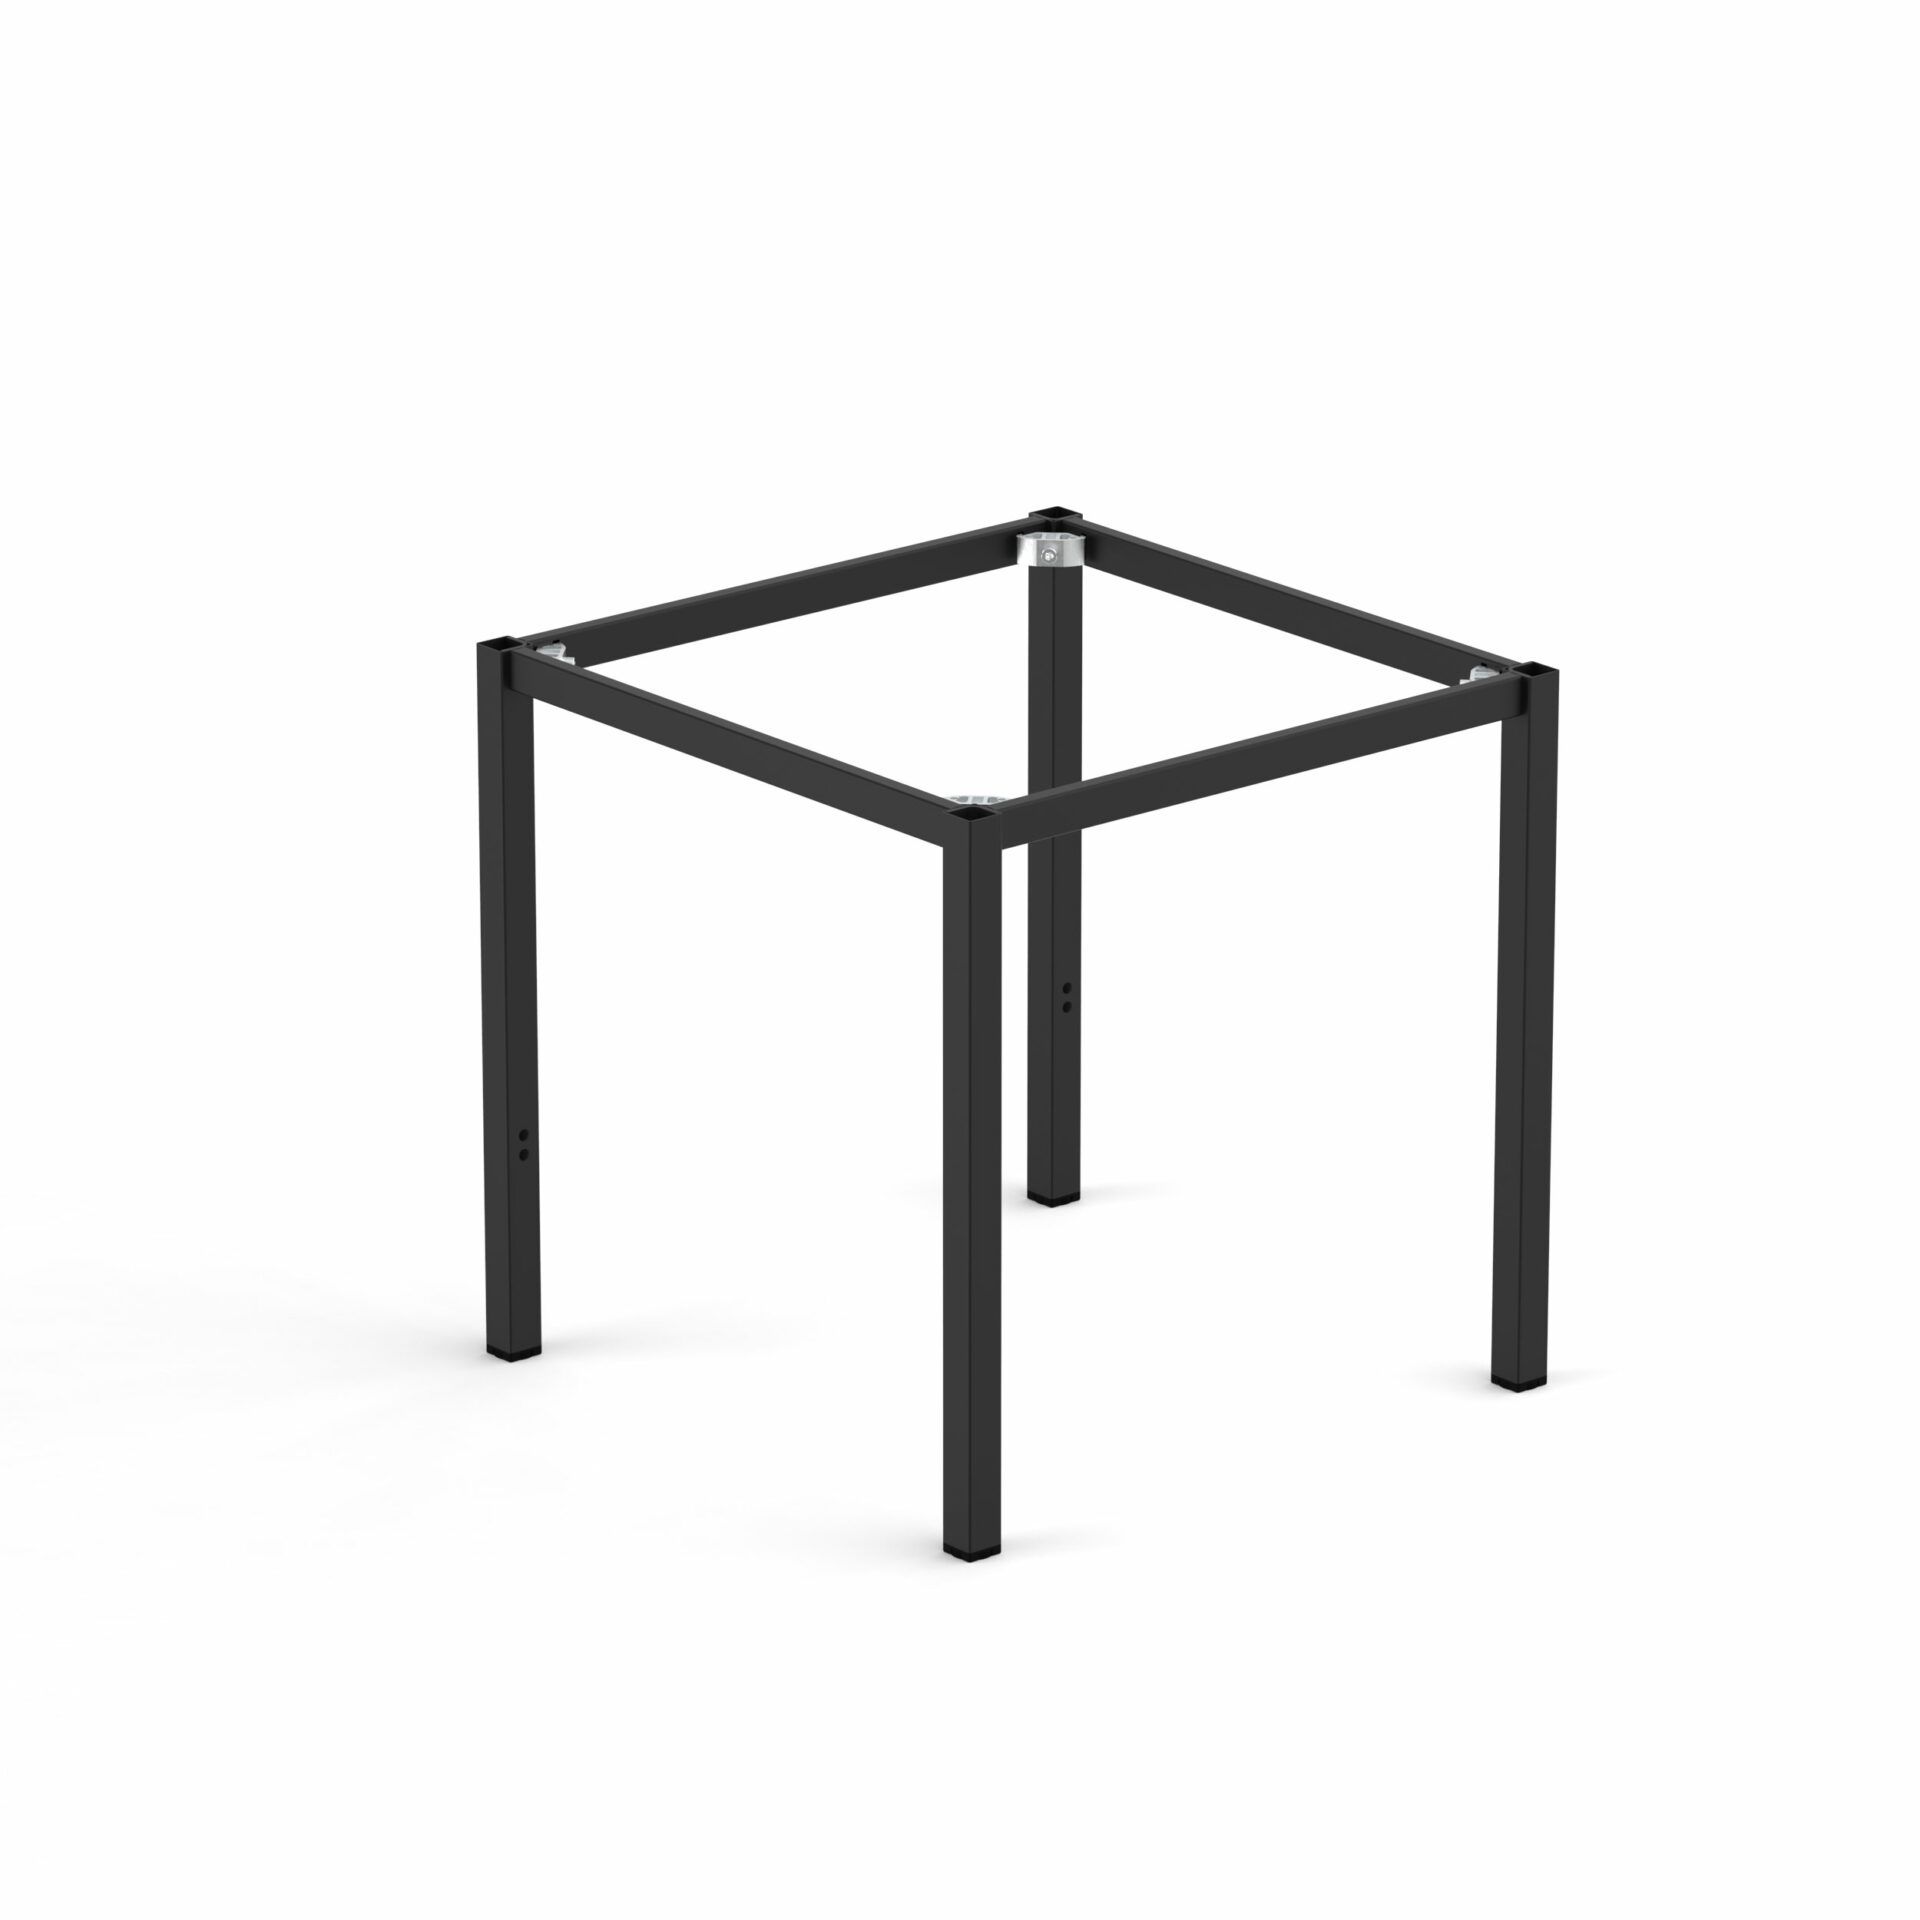 Spire Square leg Table Height Frame 990 x 990 x 720H